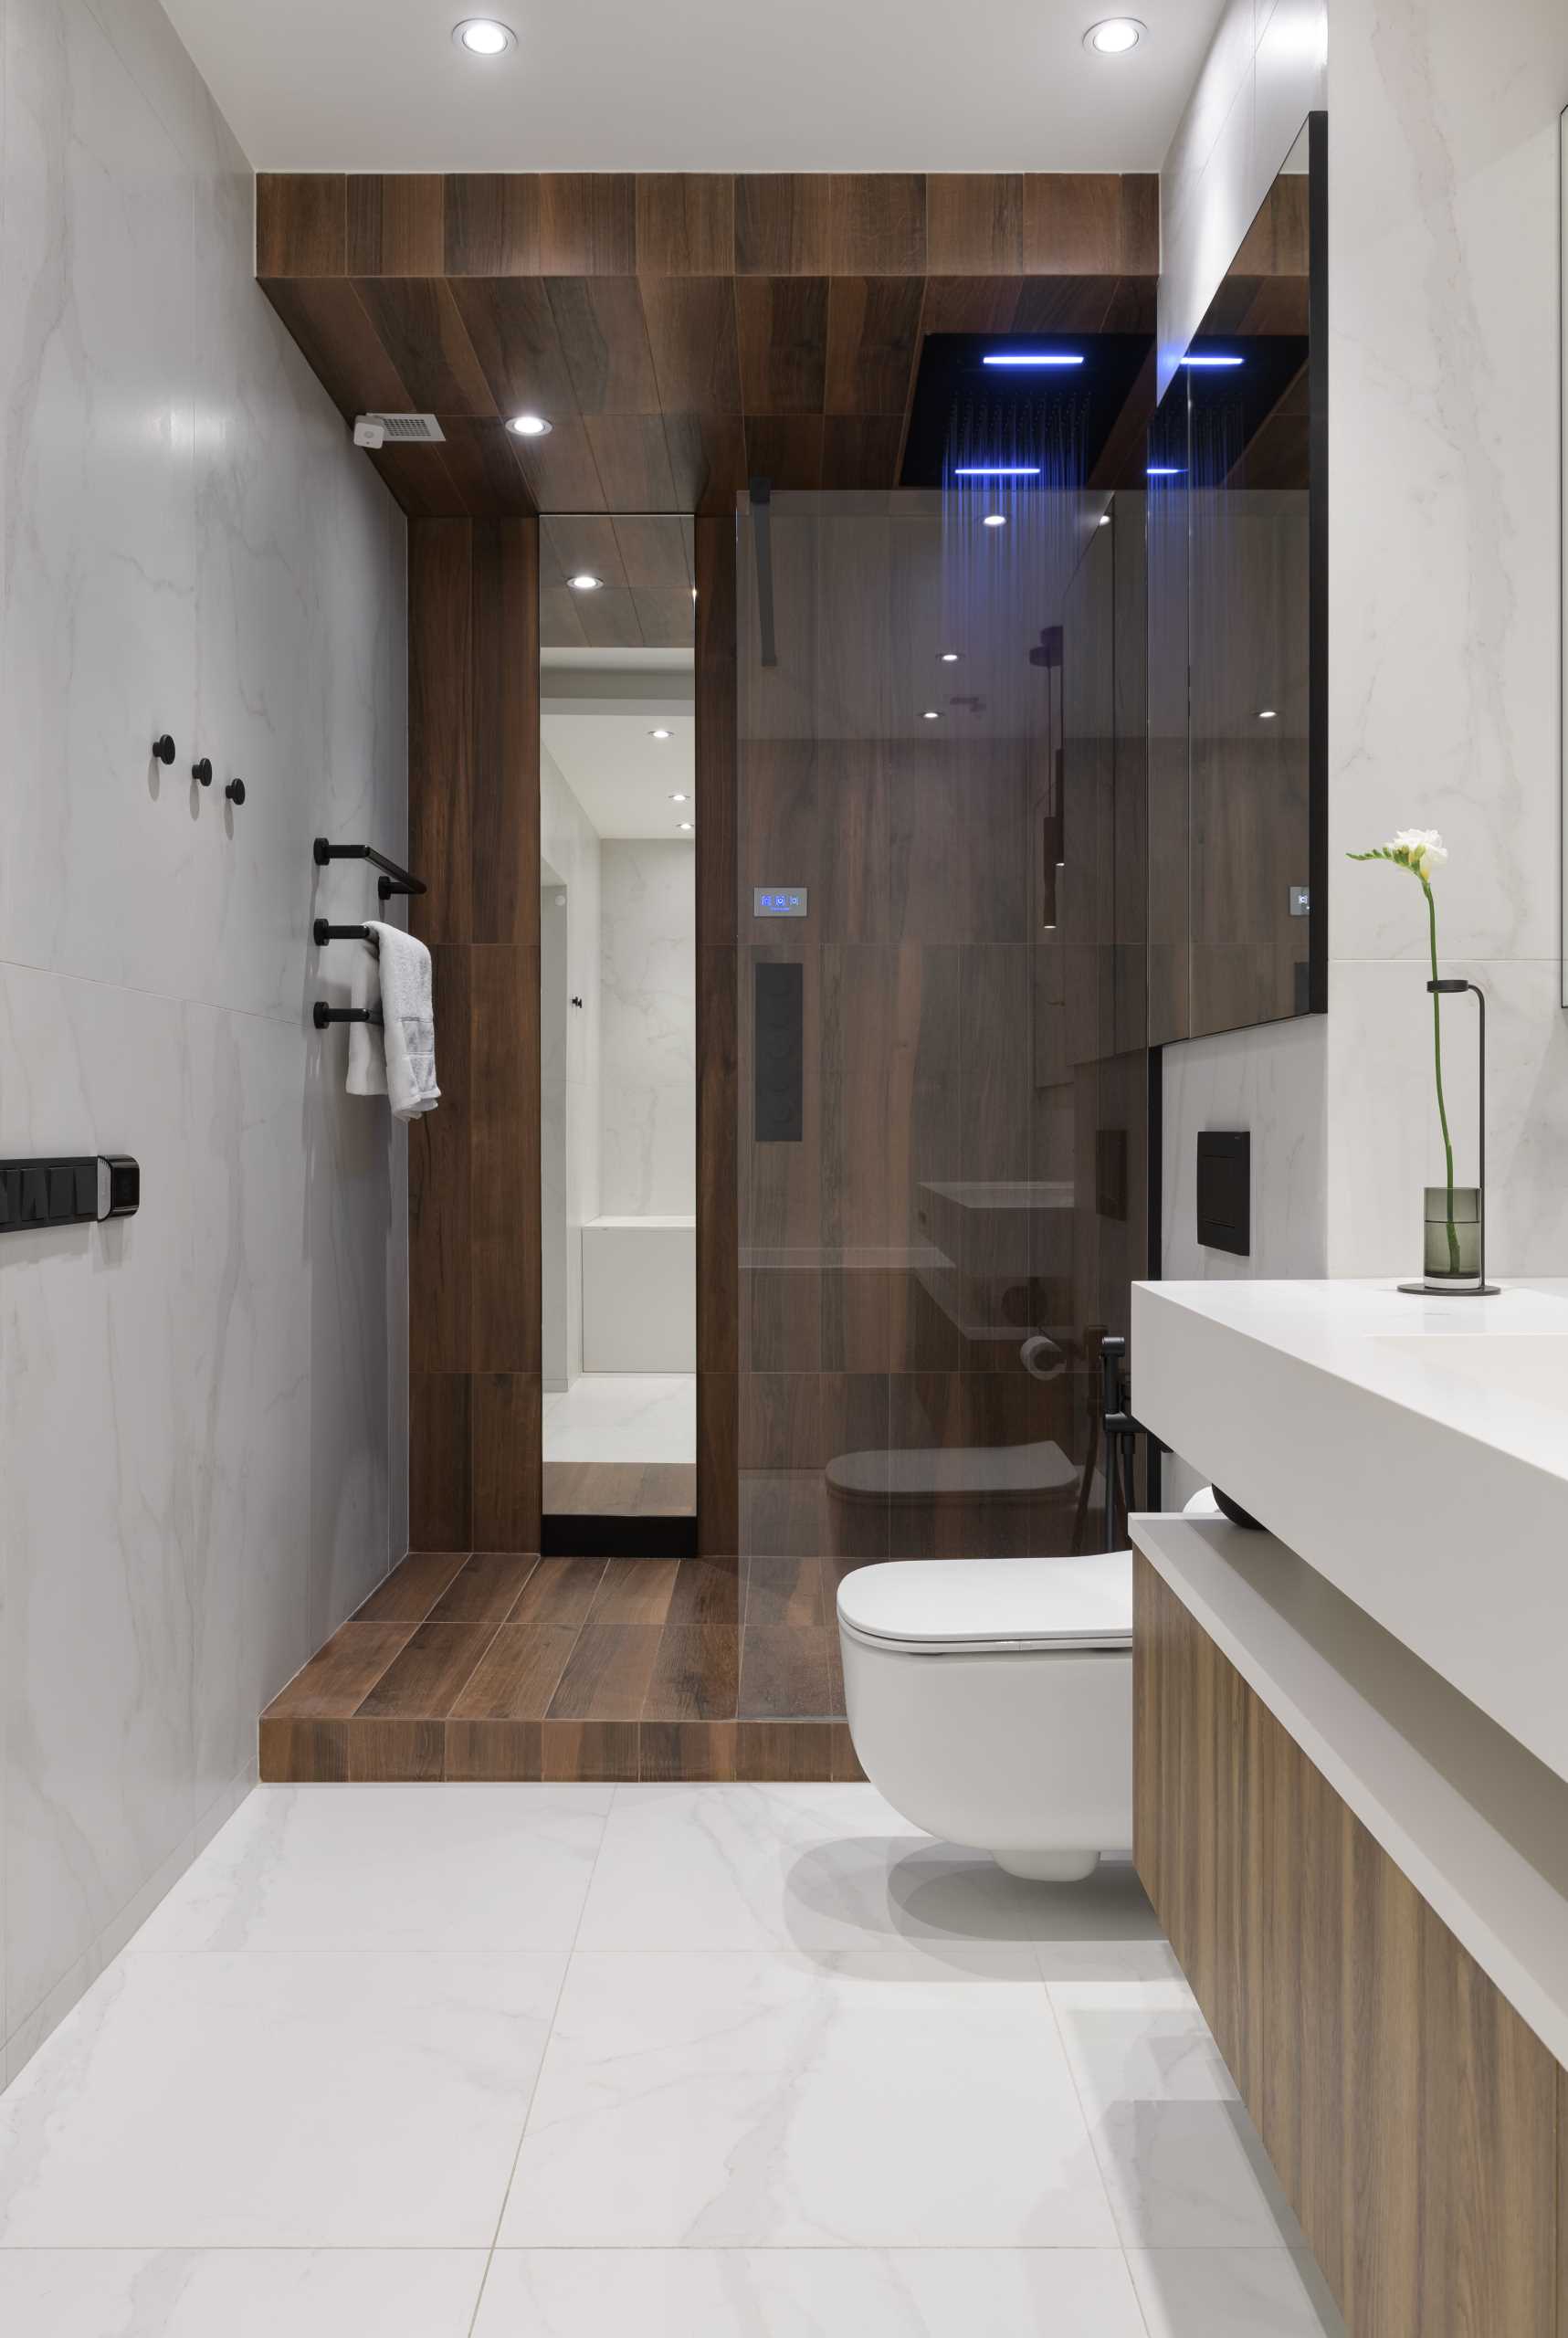 A modern bathroom includes a floating wood and white vanity, a bathtub that perfectly fits between the walls, and a walk-in shower.